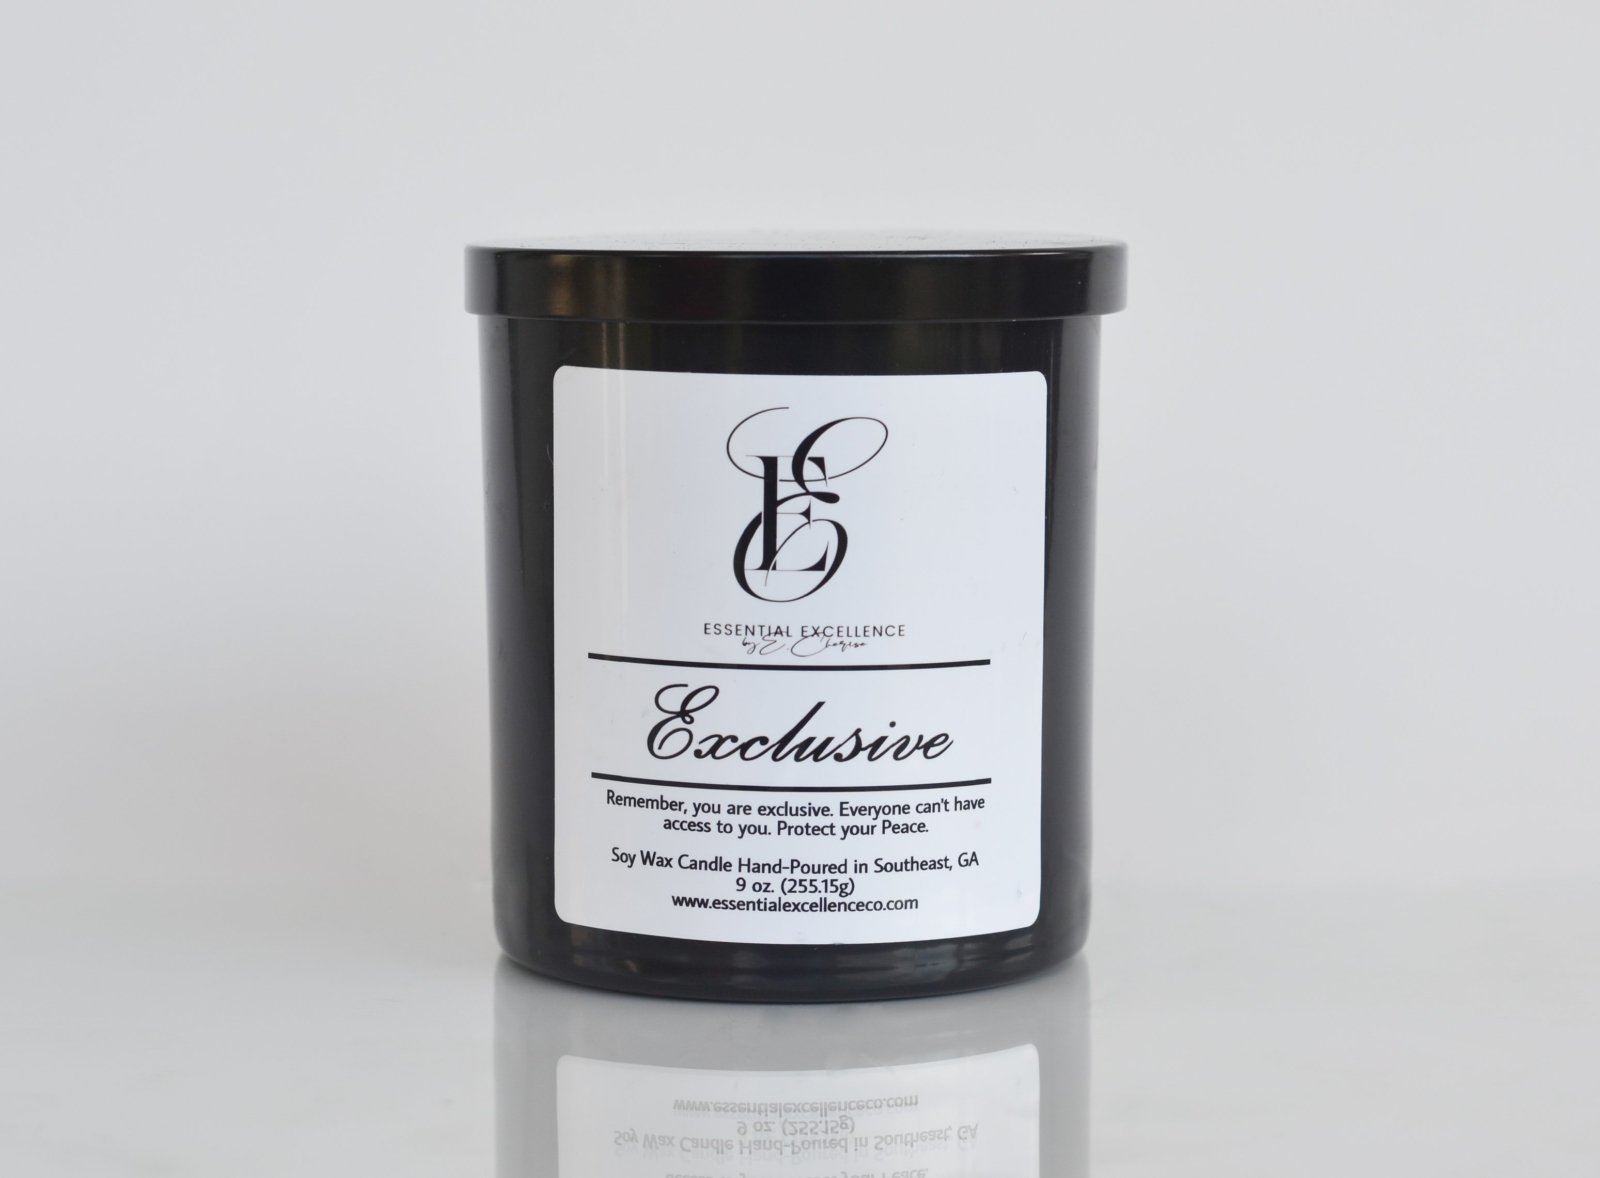 Exclusive - Essential Excellence Co.